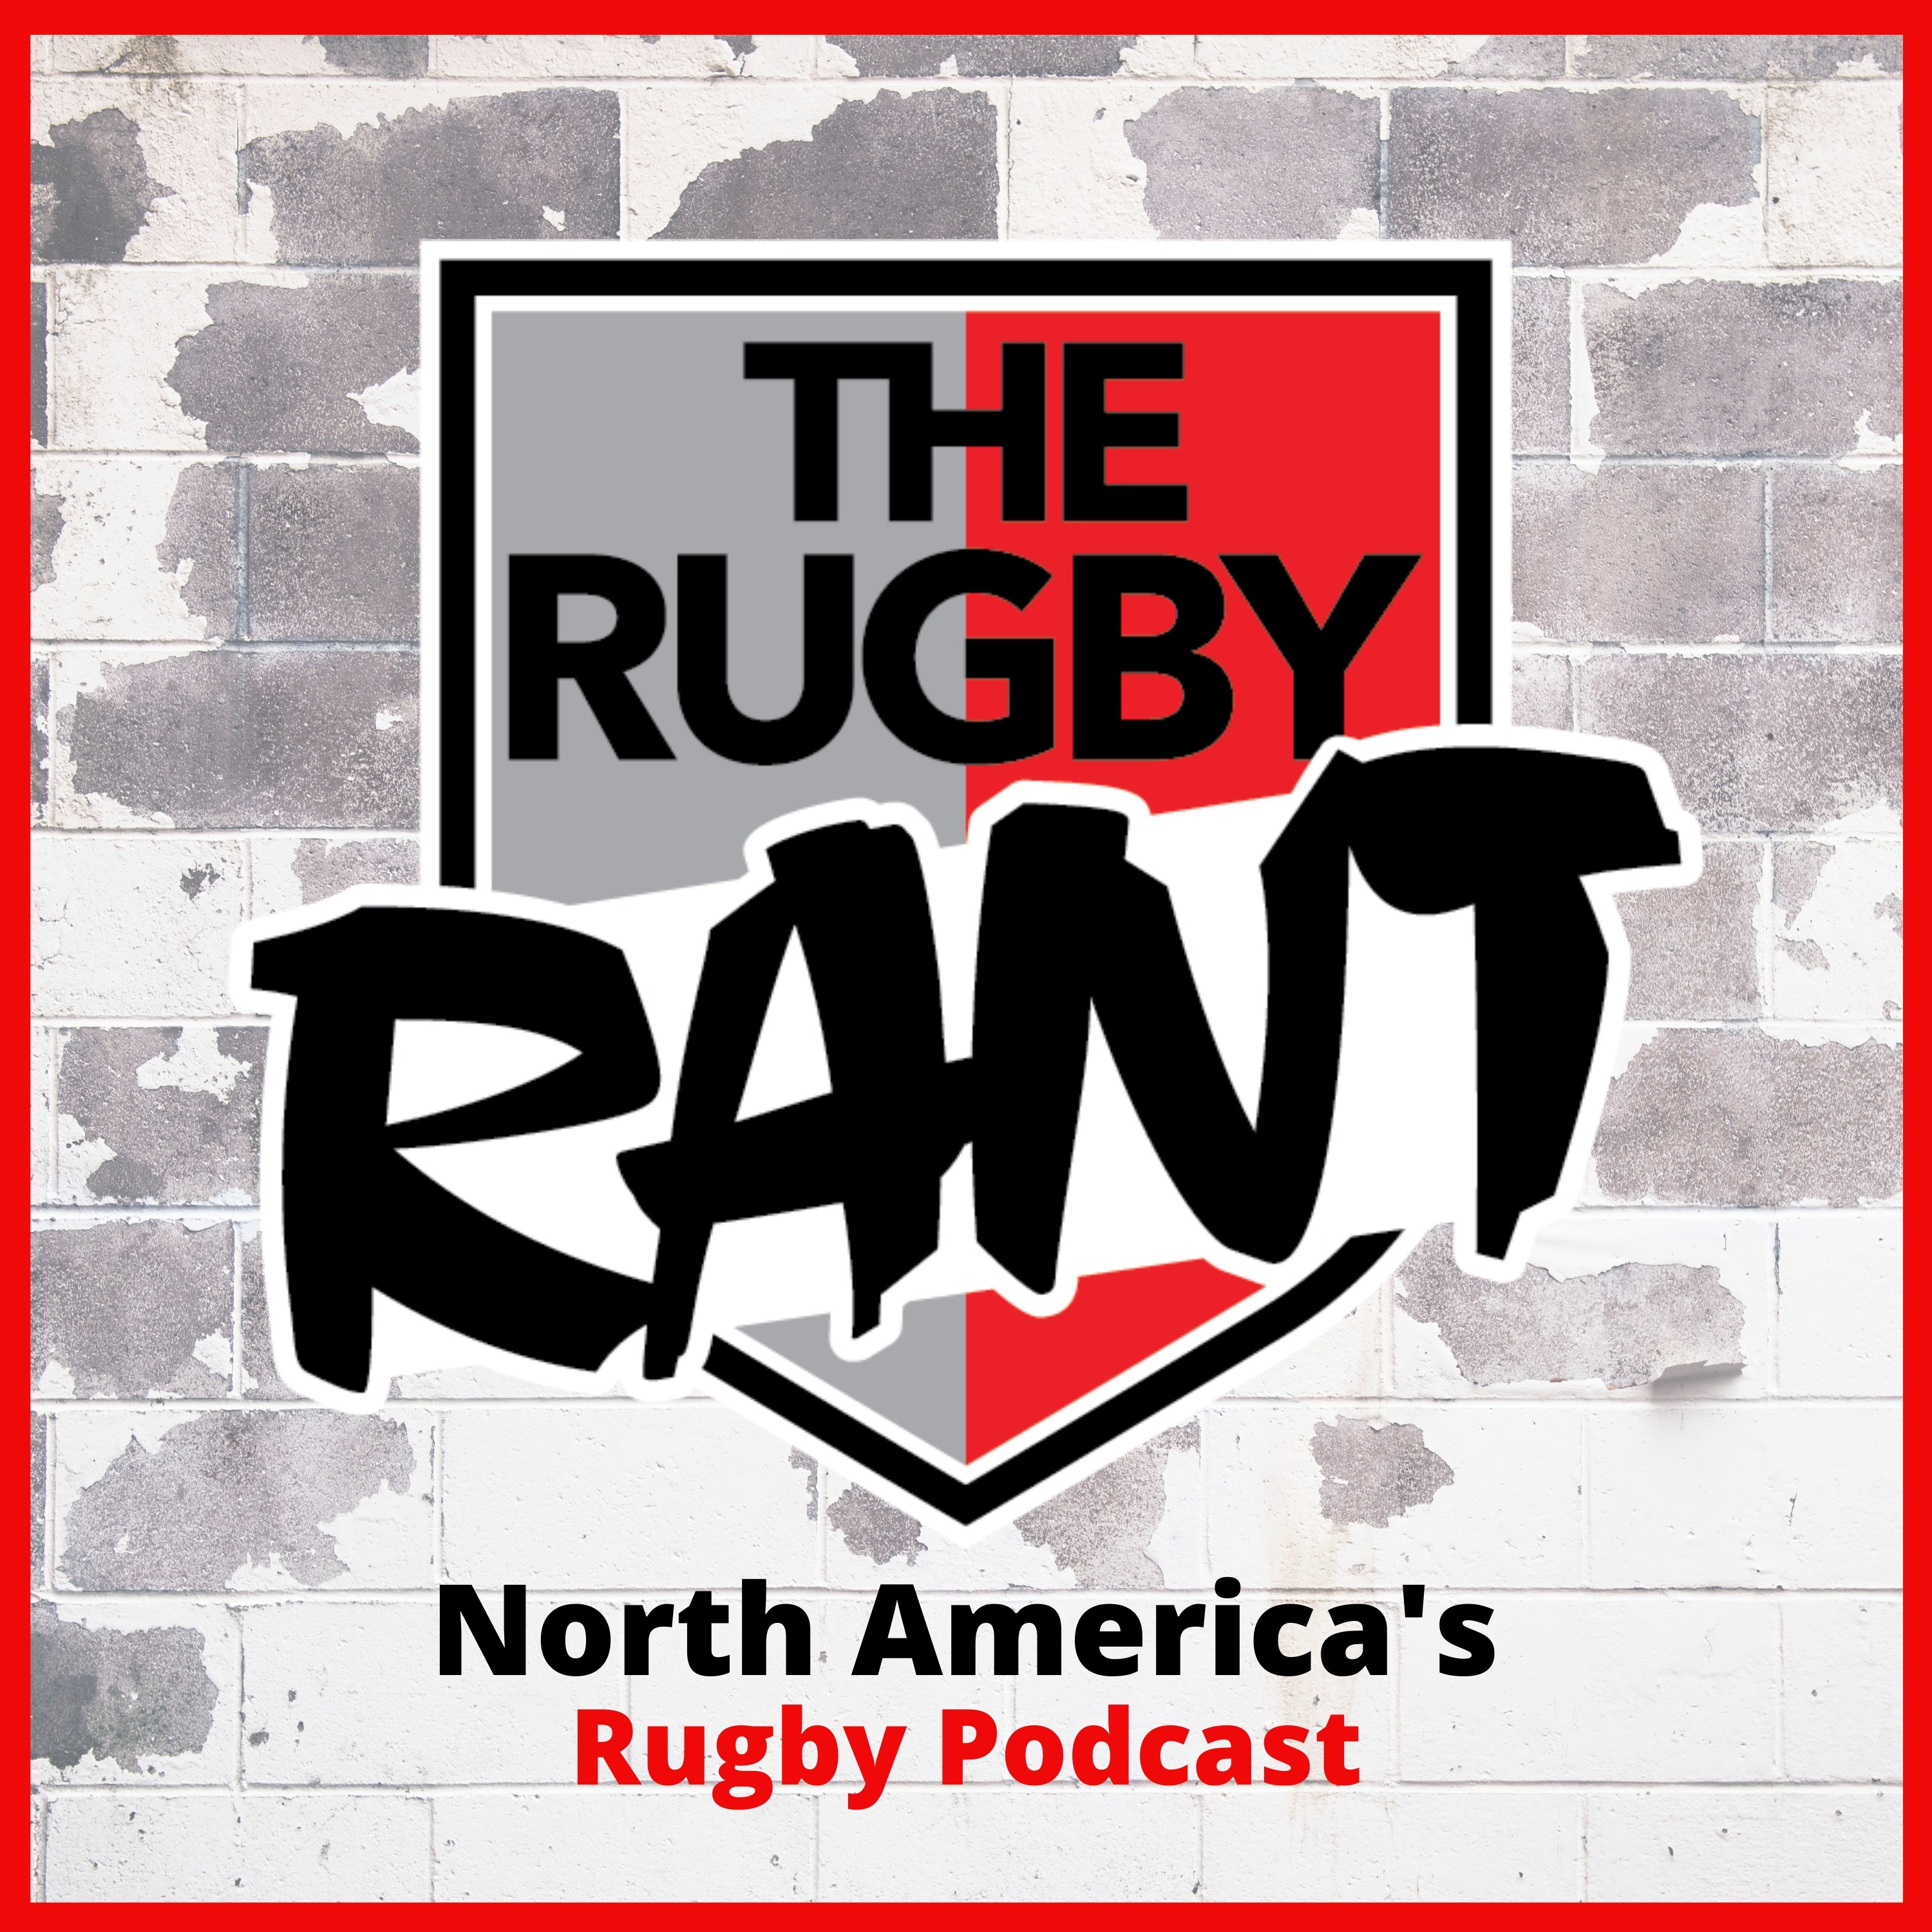 The Rugby Rant - Episode 162 - Redux ... Perpetual Sound Commencing ....